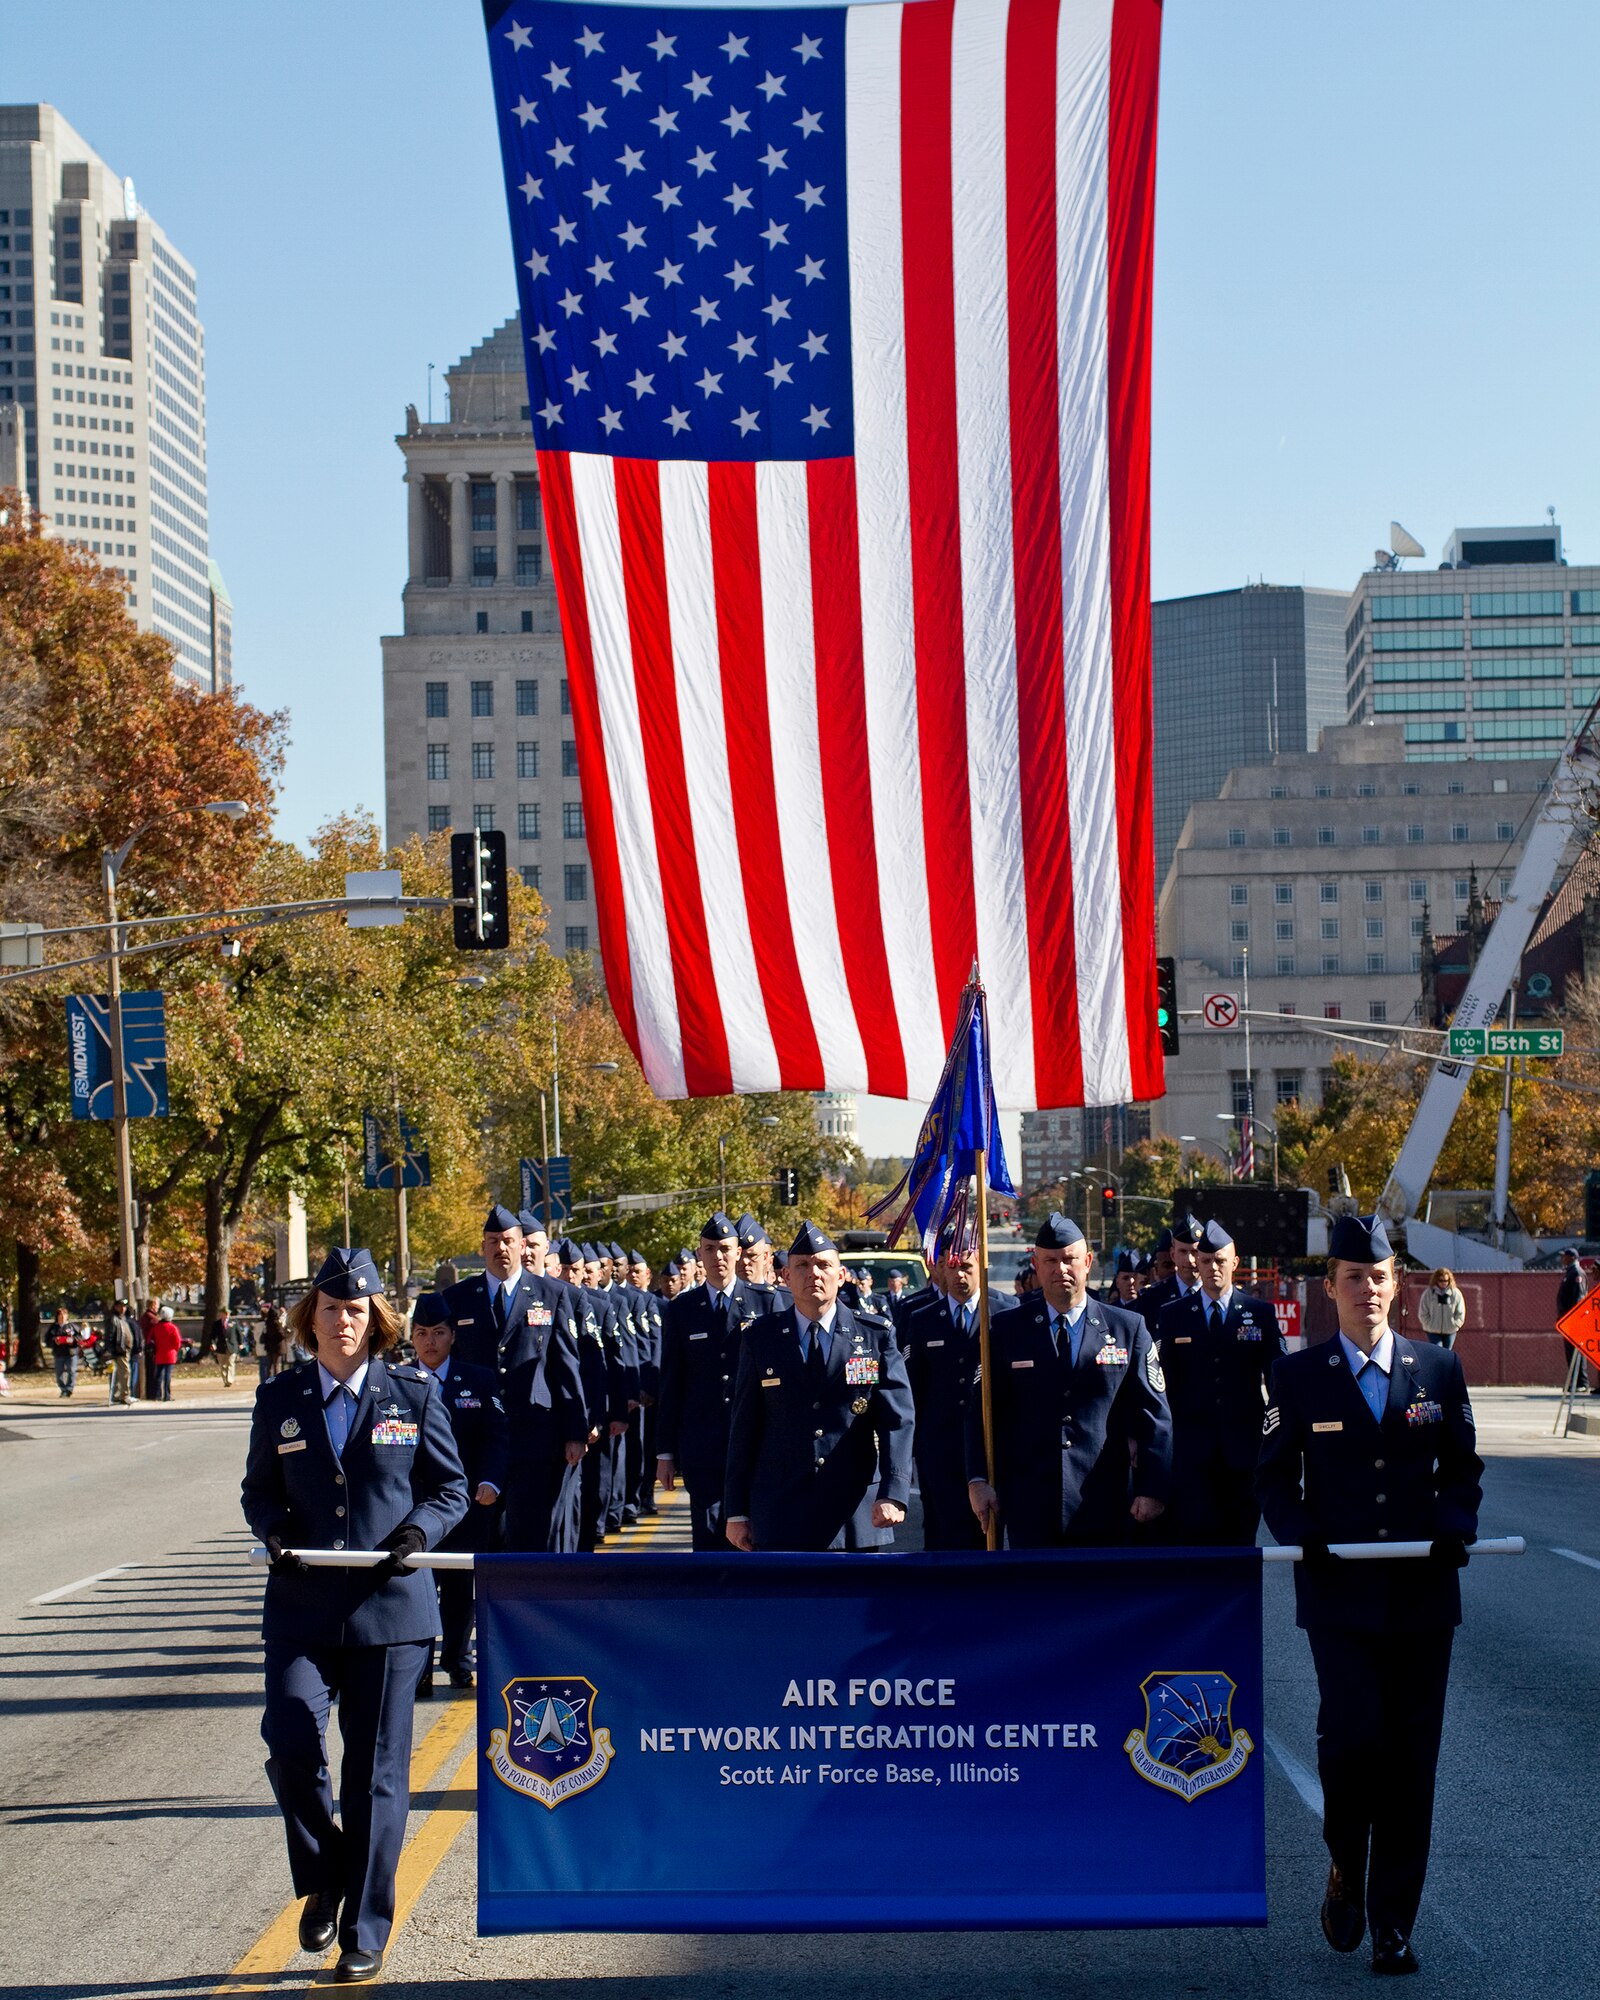 ST LOUIS, Mo. -- Airmen from the Air Force Network Integration Center at Scott Air Force Base, Ill., march in formation down Market Street in downtown St. Louis as part  of the city's 27th annual Veterans Day parade Nov. 6.  (U.S. Air Force photo/MSgt G. Shawn Lowry)
